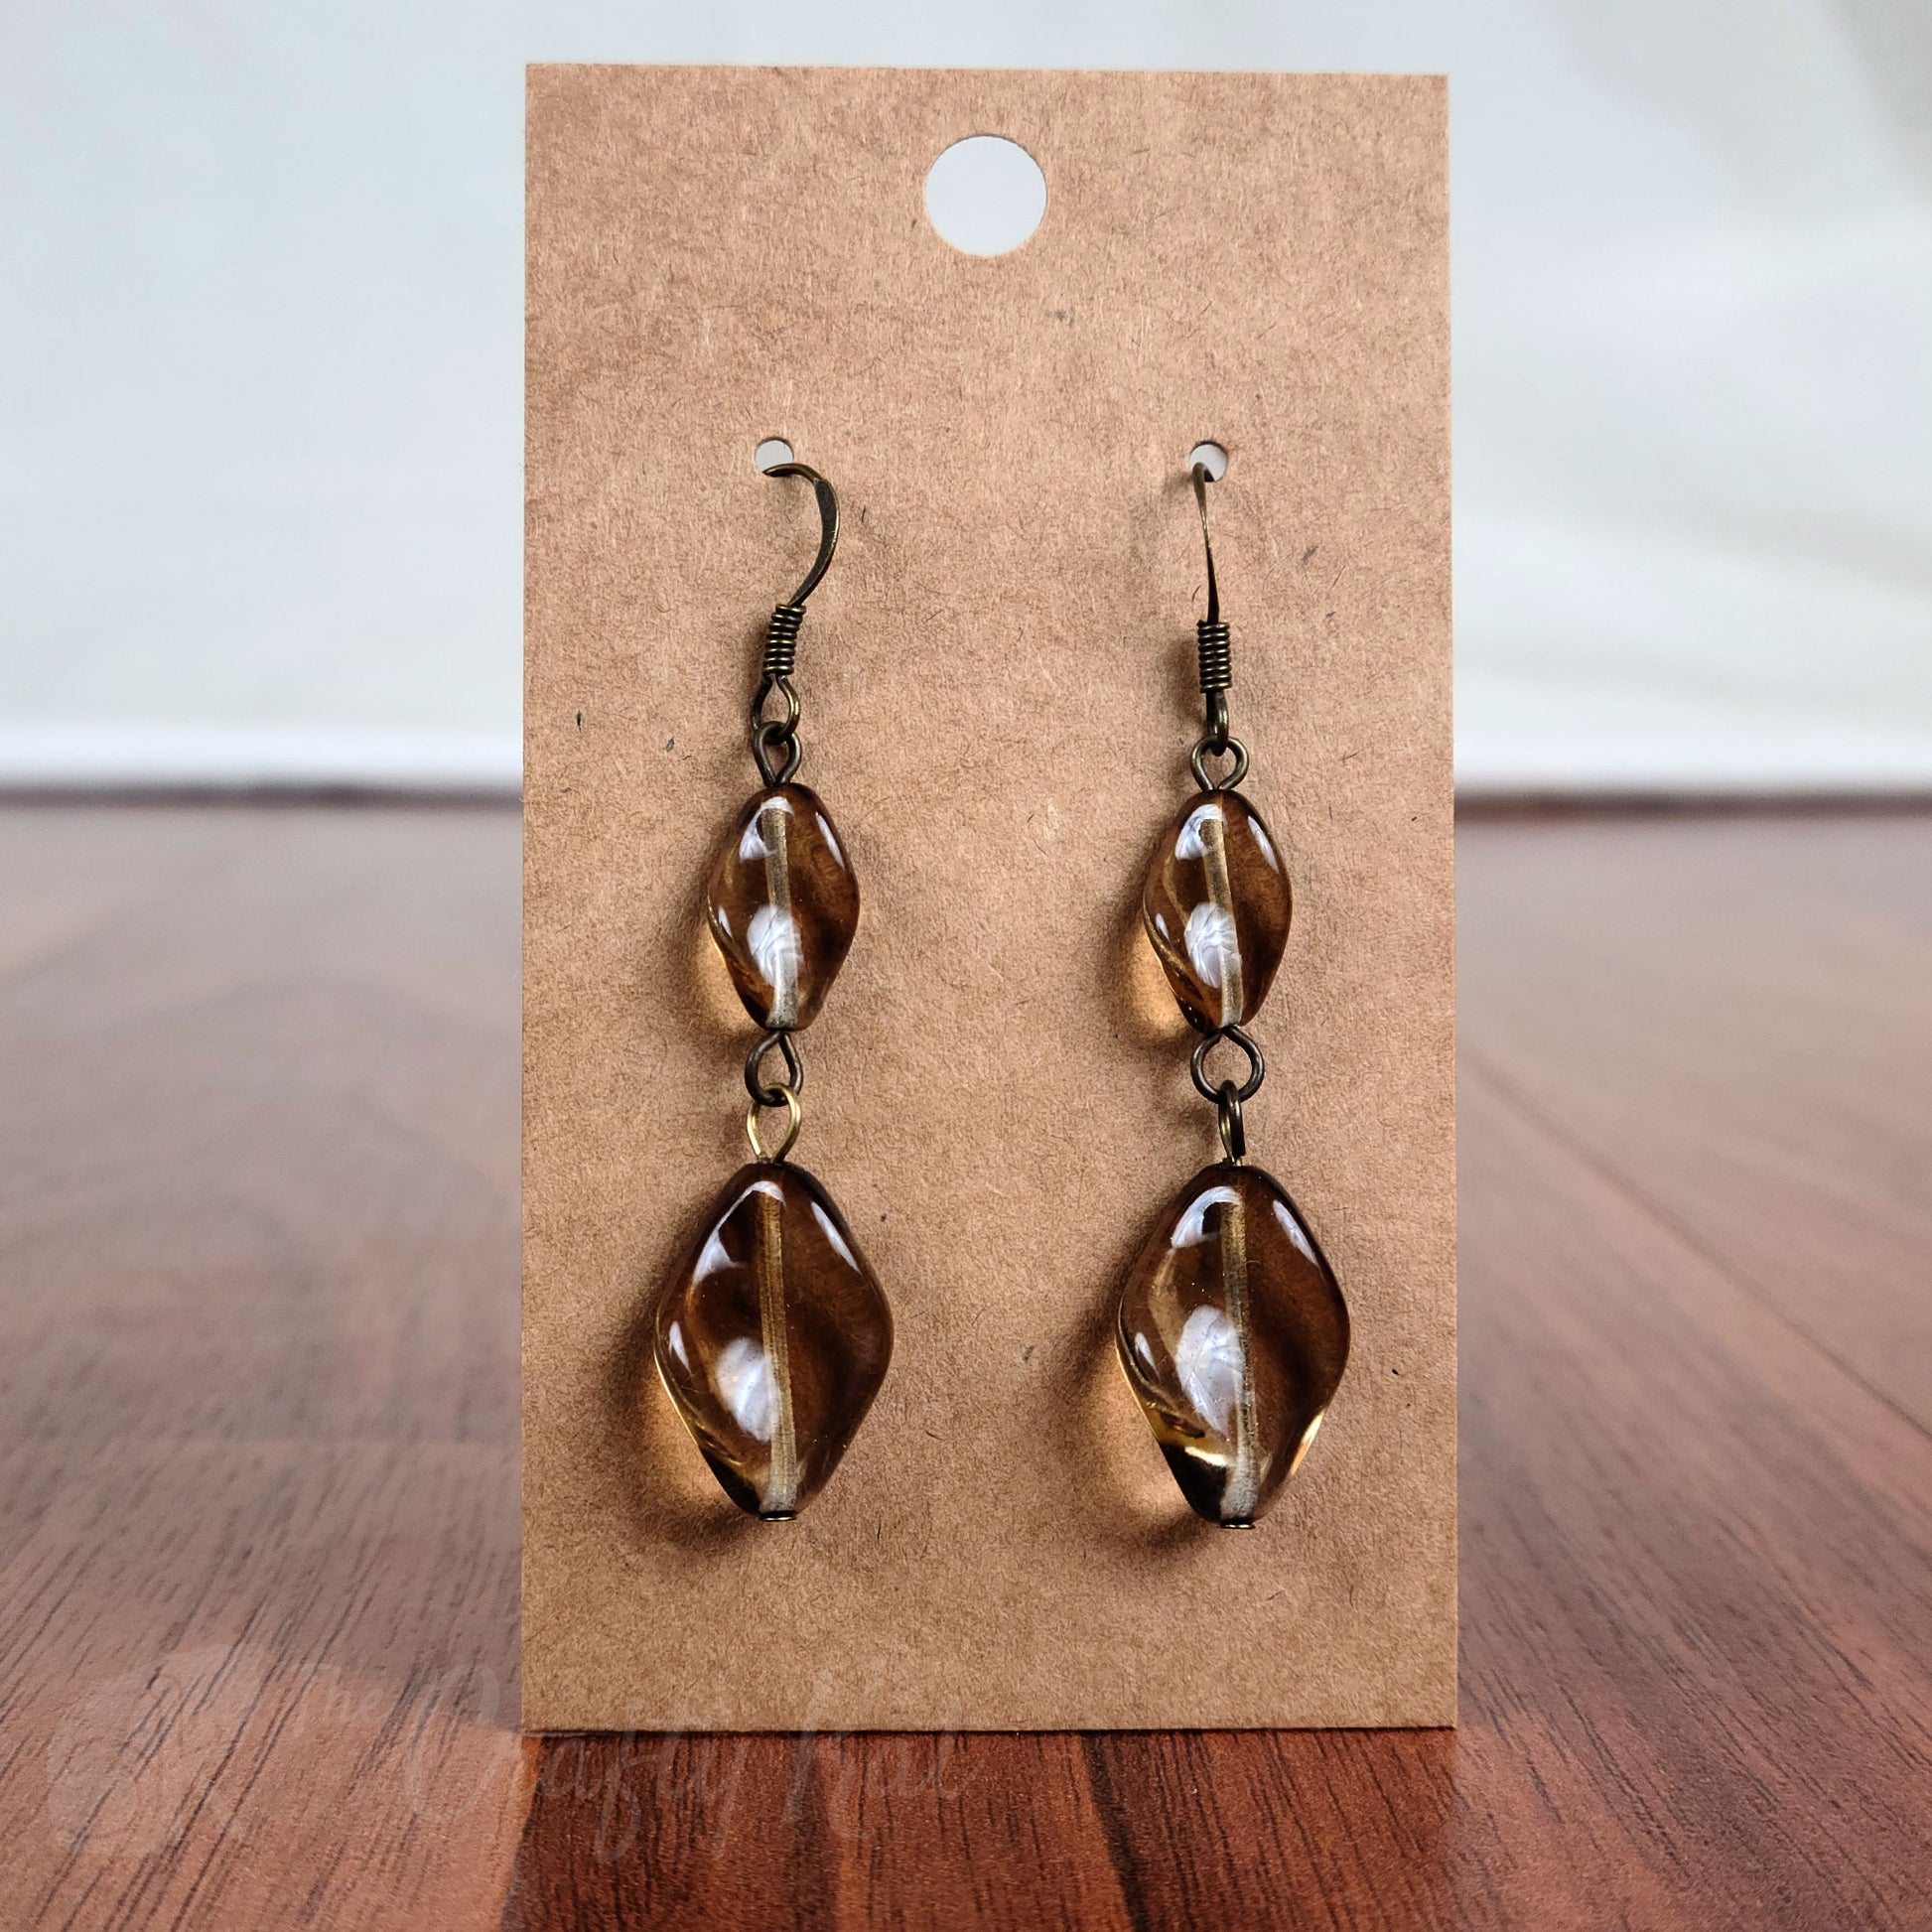 Tiered earrings made with translucent brown twisted glass beads on bronze fittings.